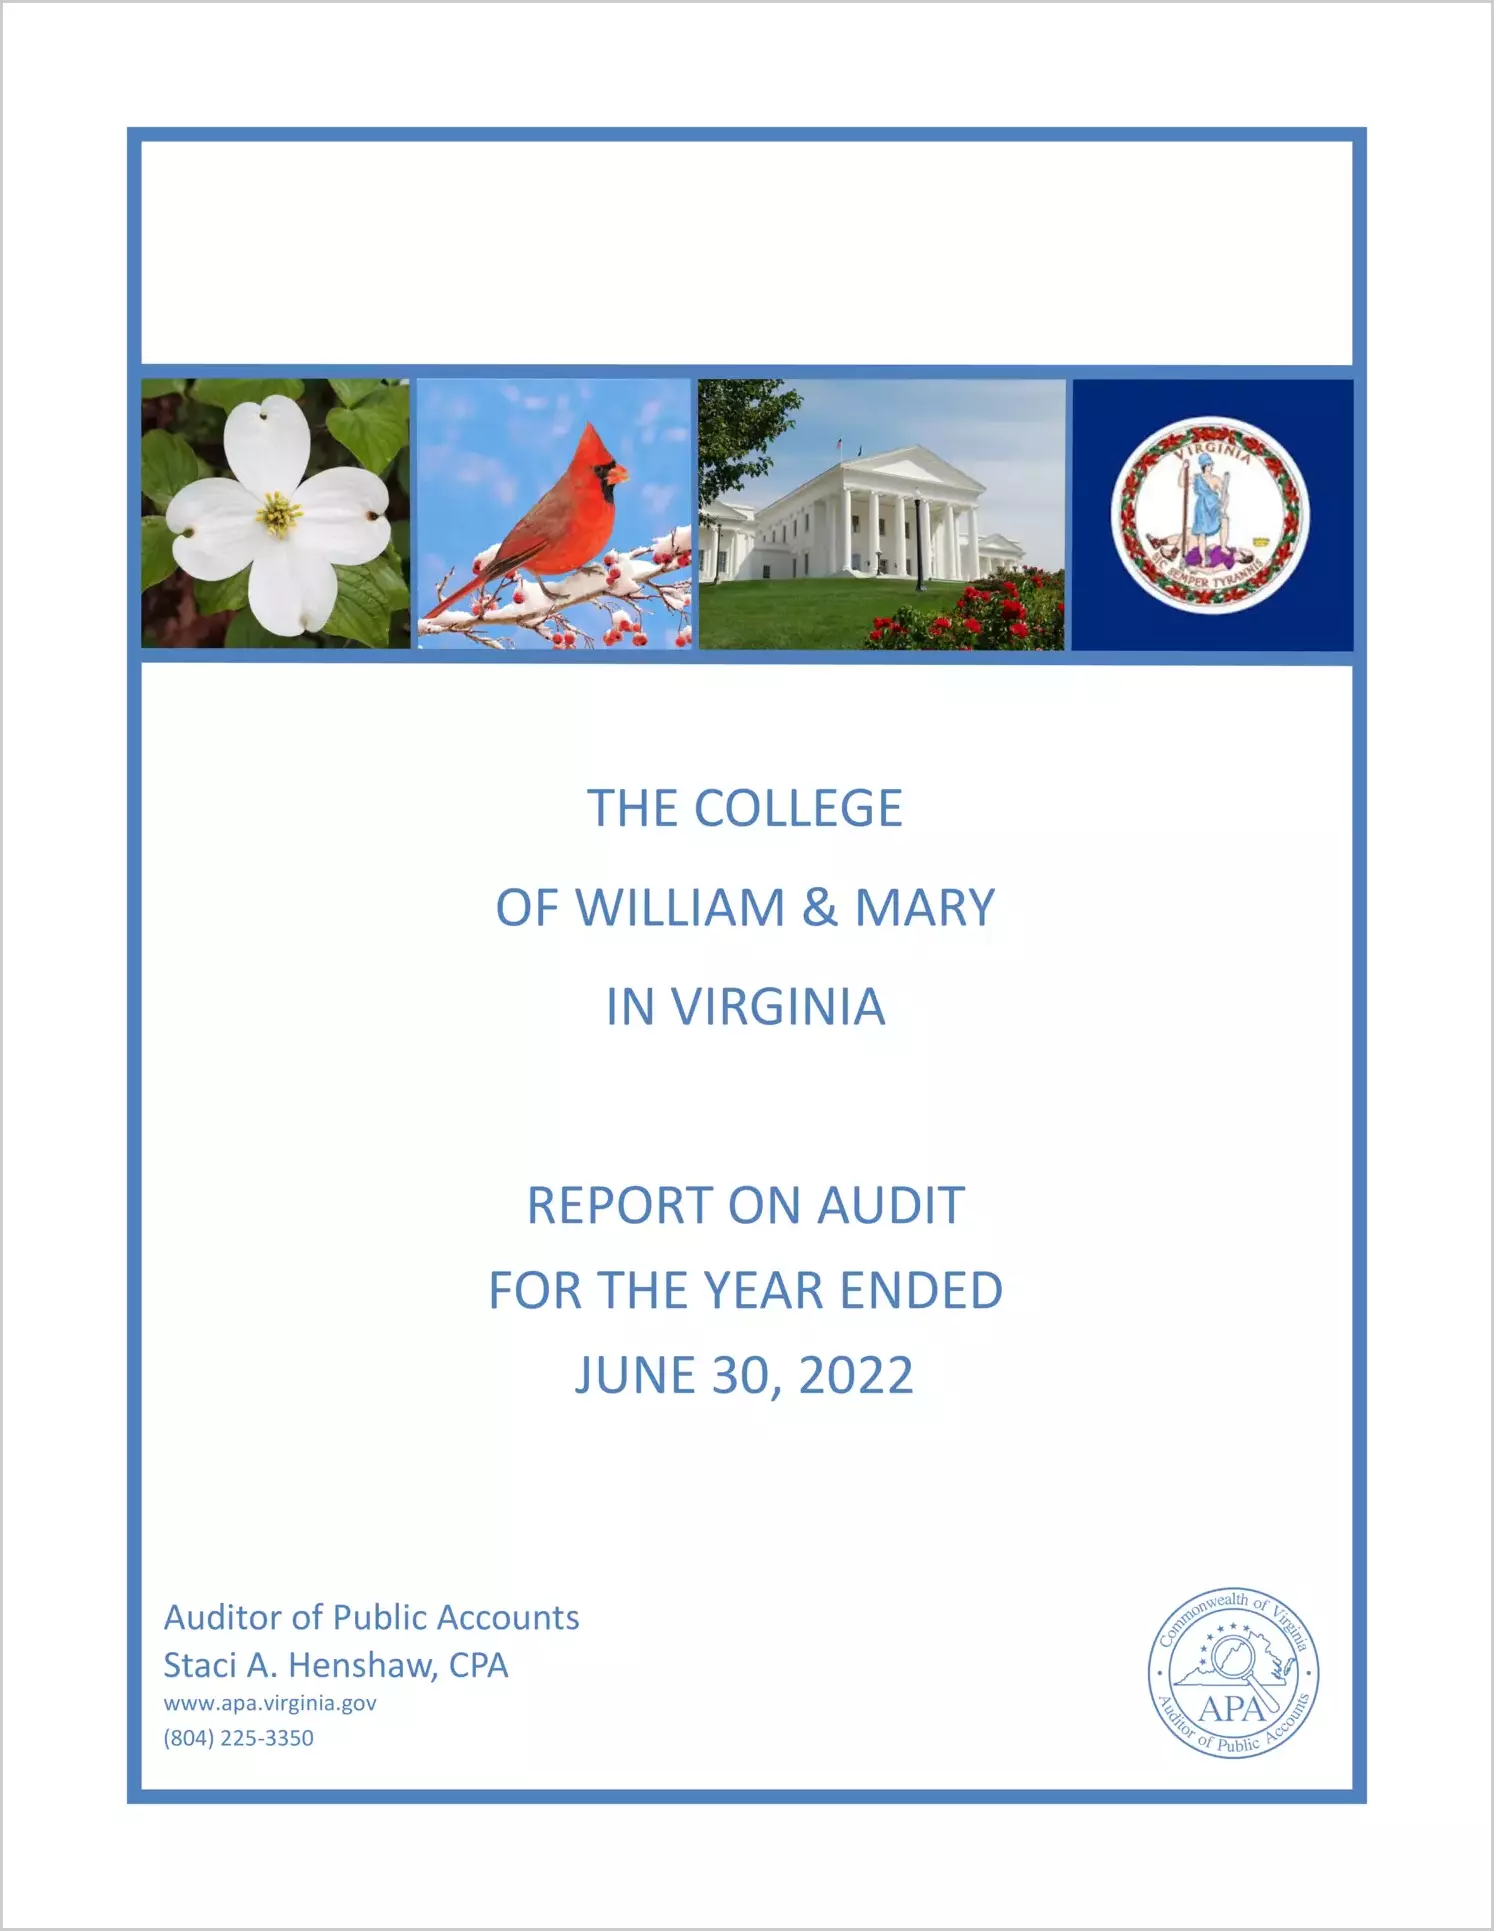 The College of William & Mary in Virginia for the year ended June 30, 2022